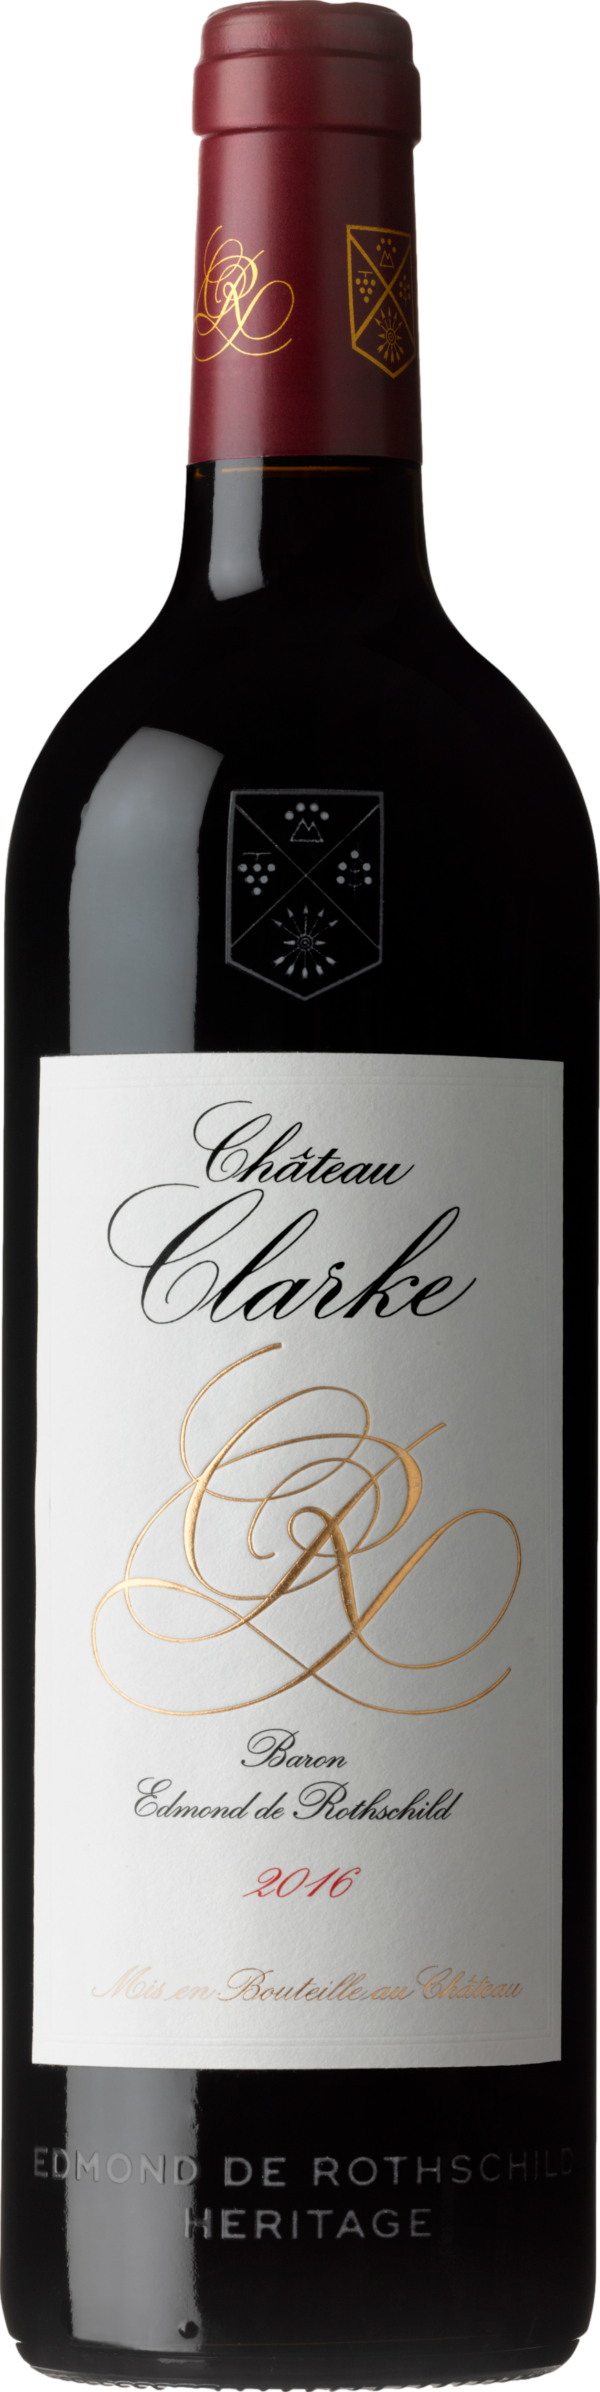 Product image of Edmond de Rothschild Chateau Clarke 2015 from 8wines